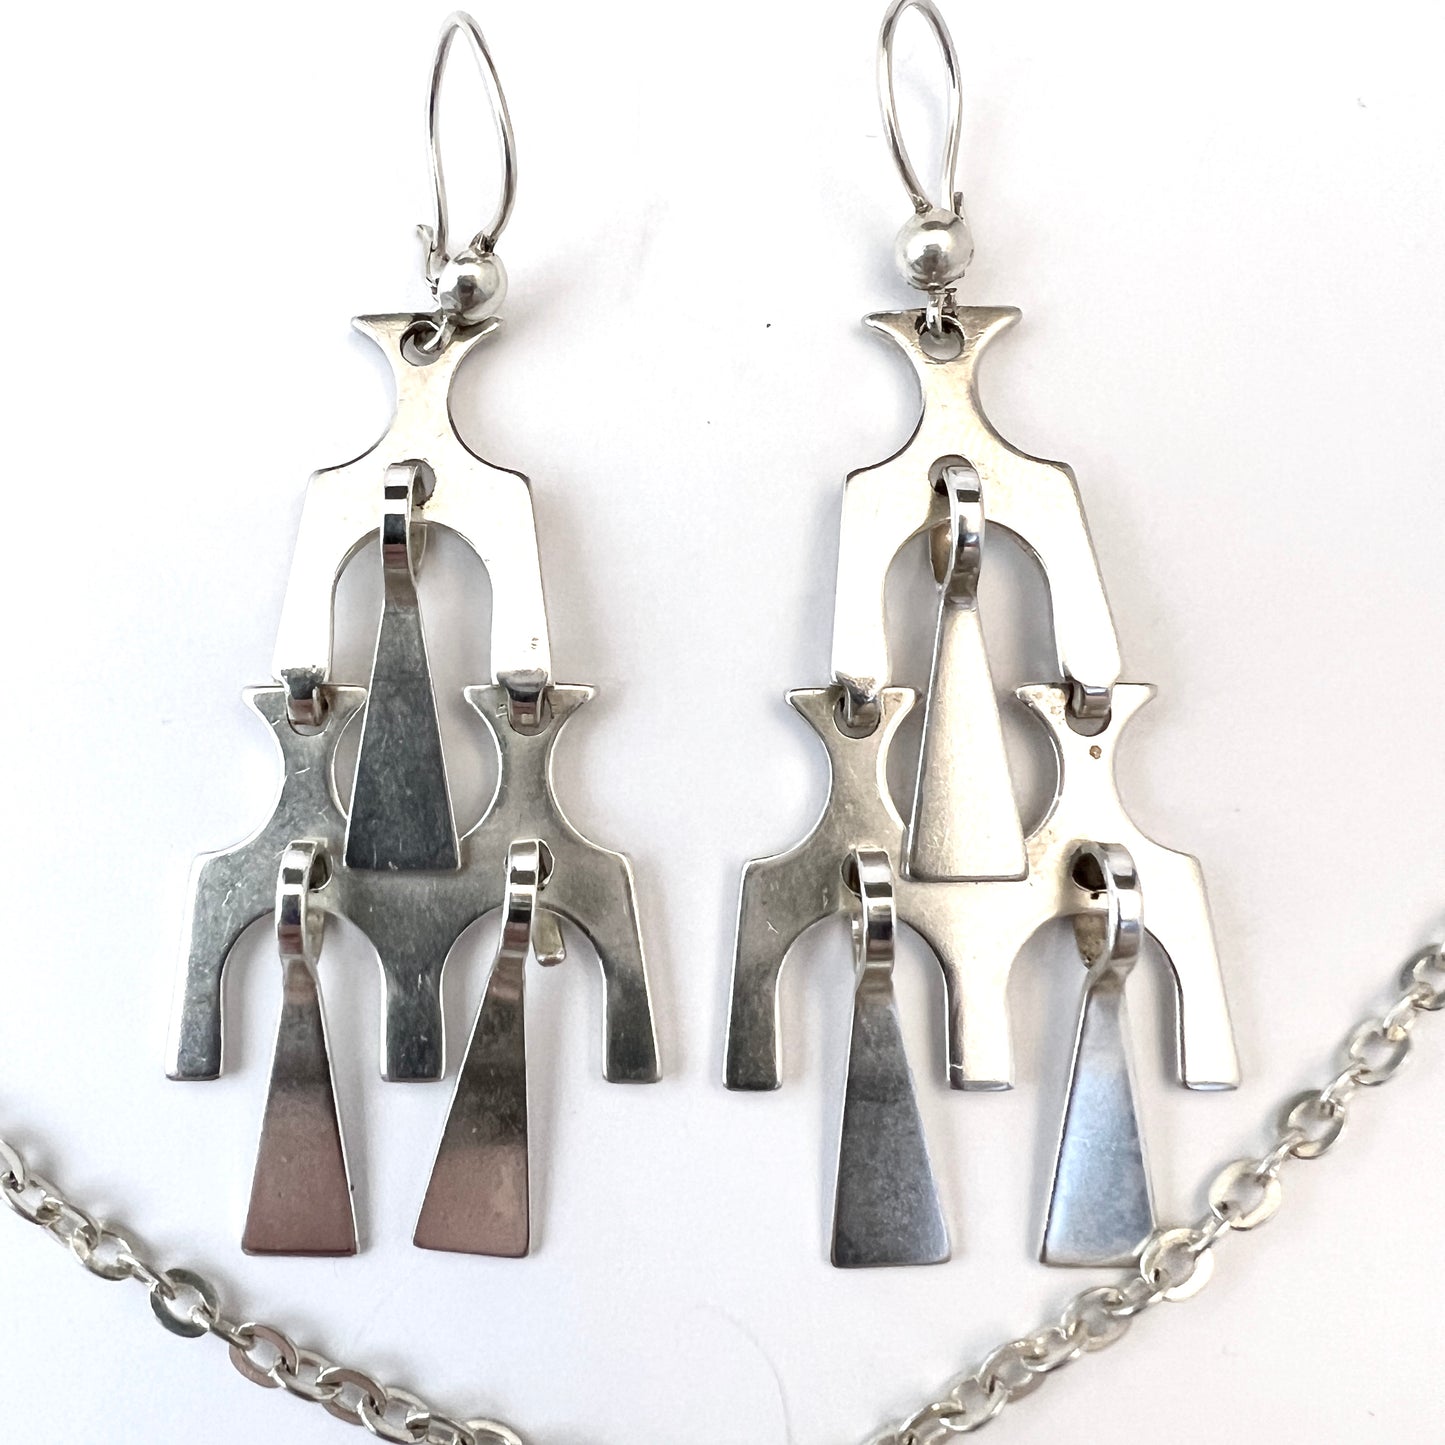 David-Andersen, Norway 1960s. Vintage Sterling Silver Earrings and Pendant Necklace.